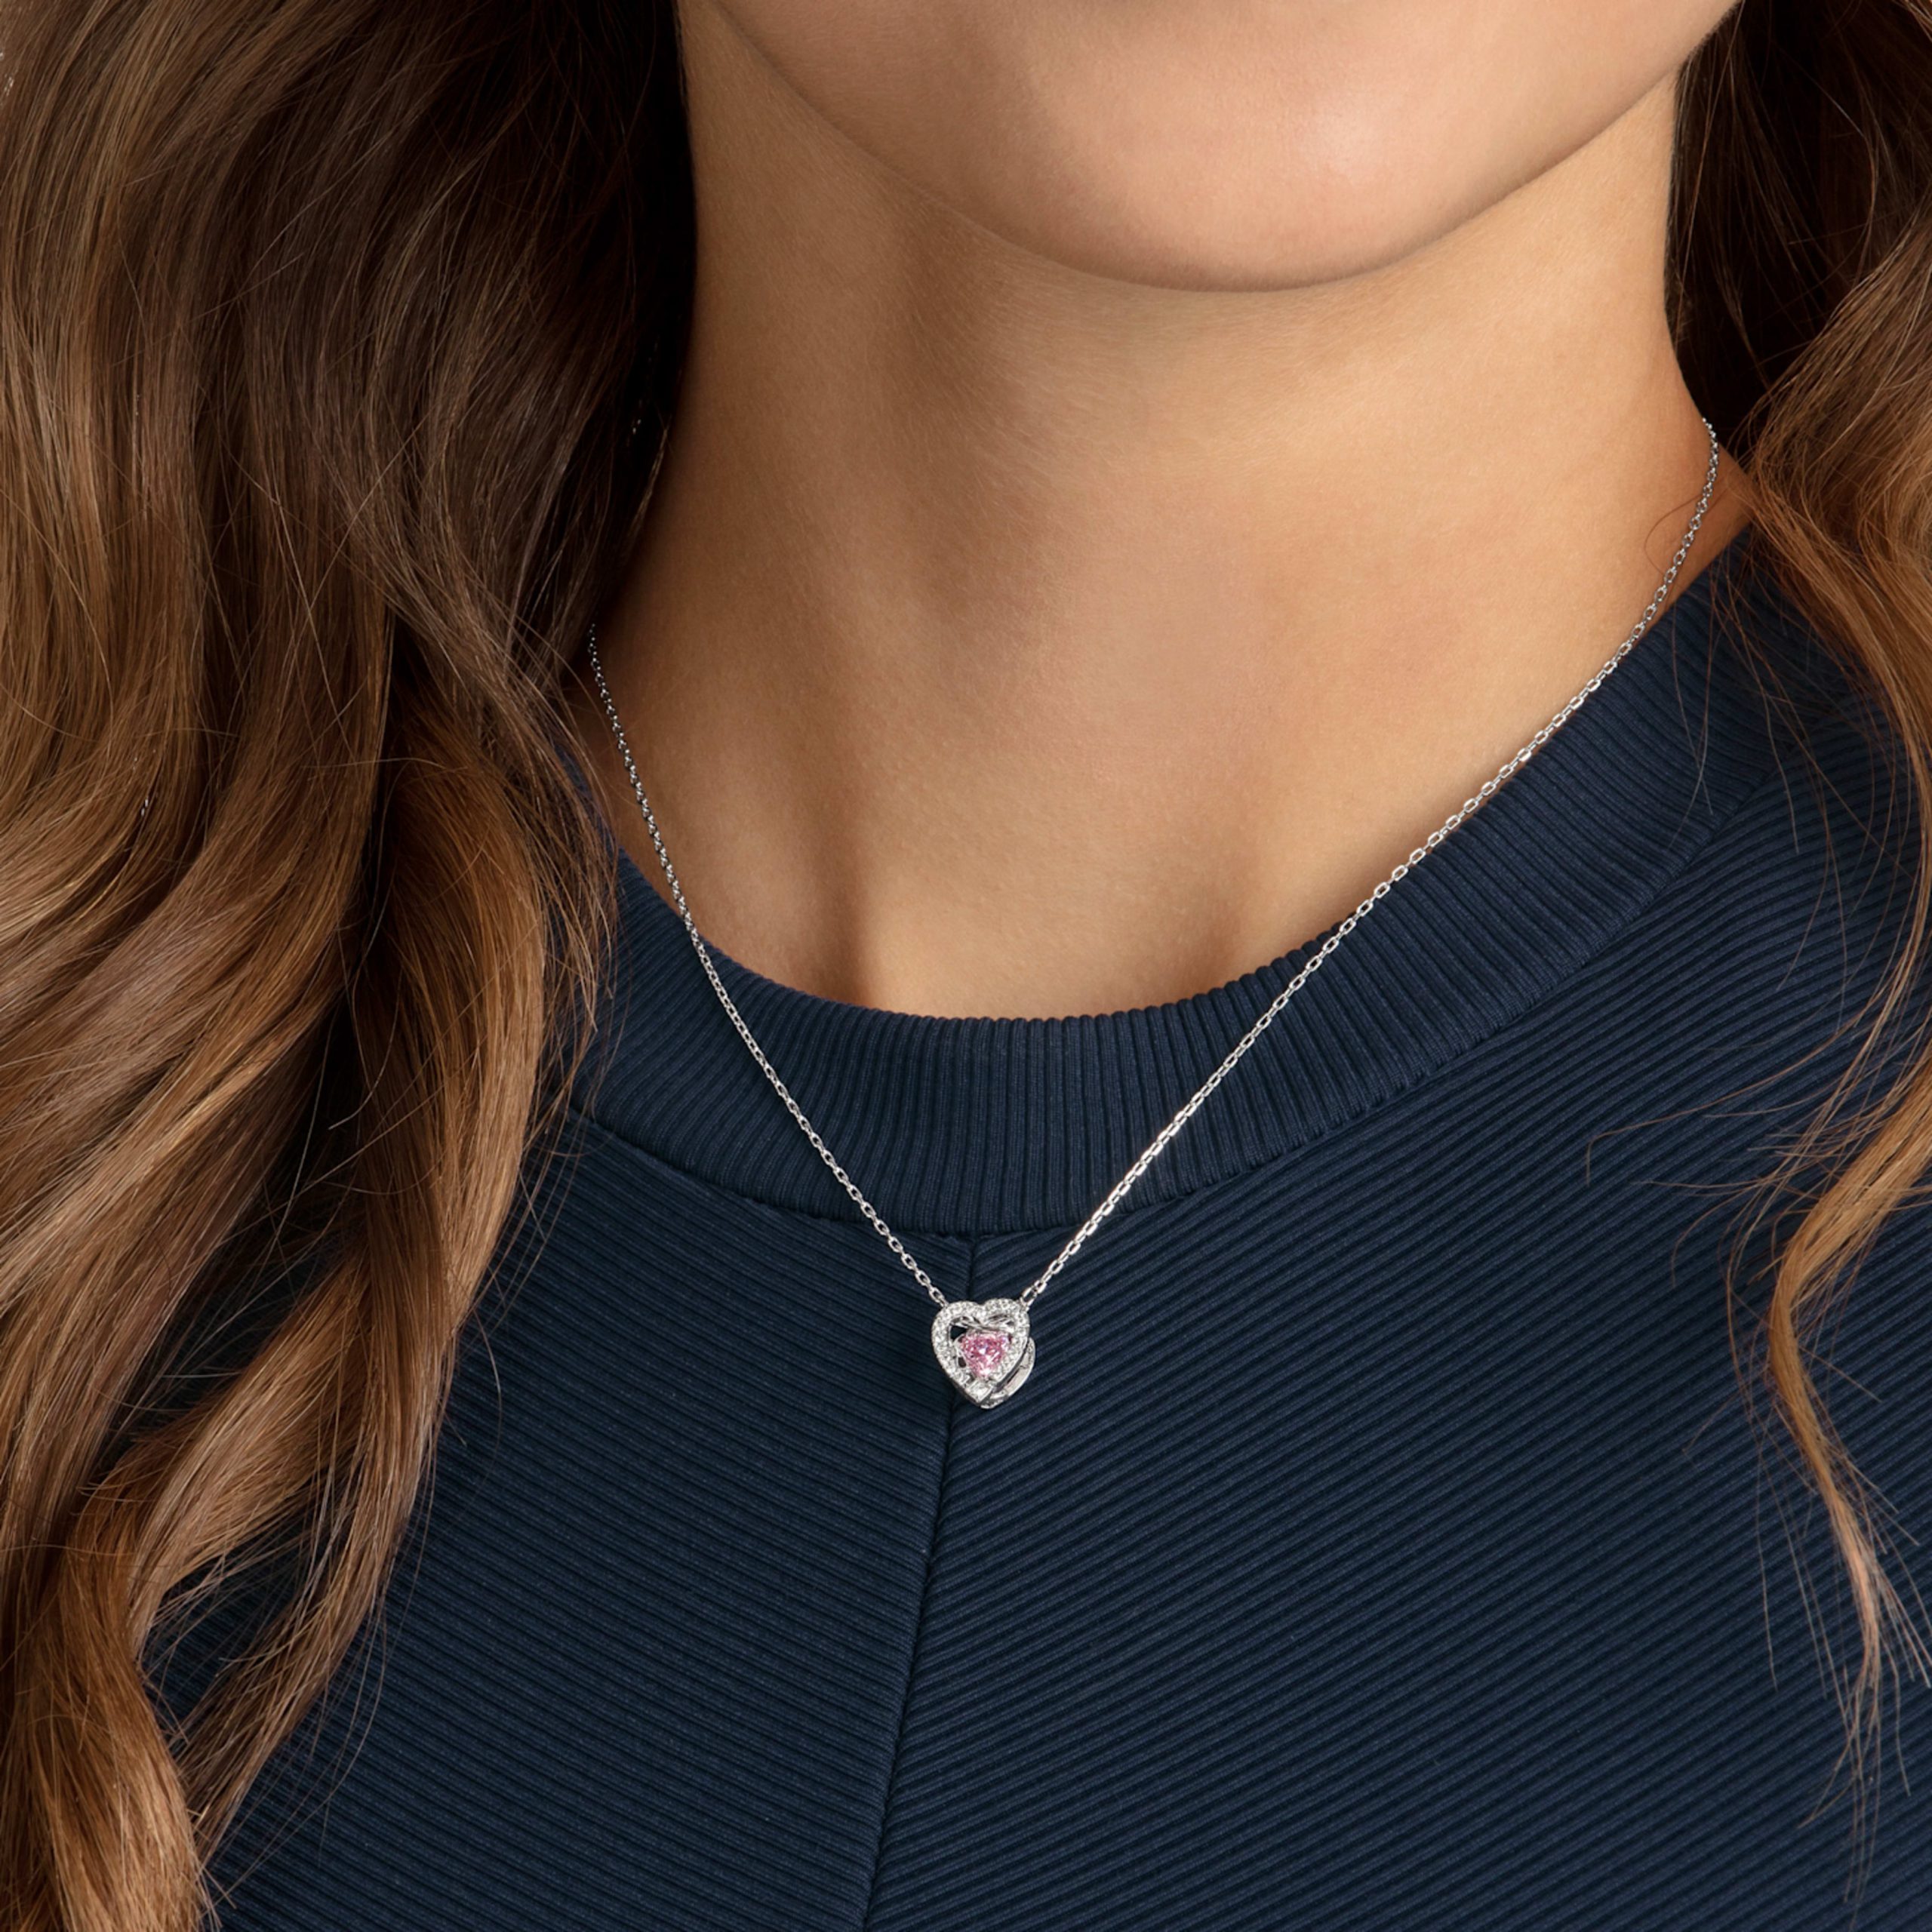 ROSE GOLD PENDANT WITH HEART SHAPED PINK SAPPHIRE AND DIAMOND HALO, .1 -  Howard's Jewelry Center